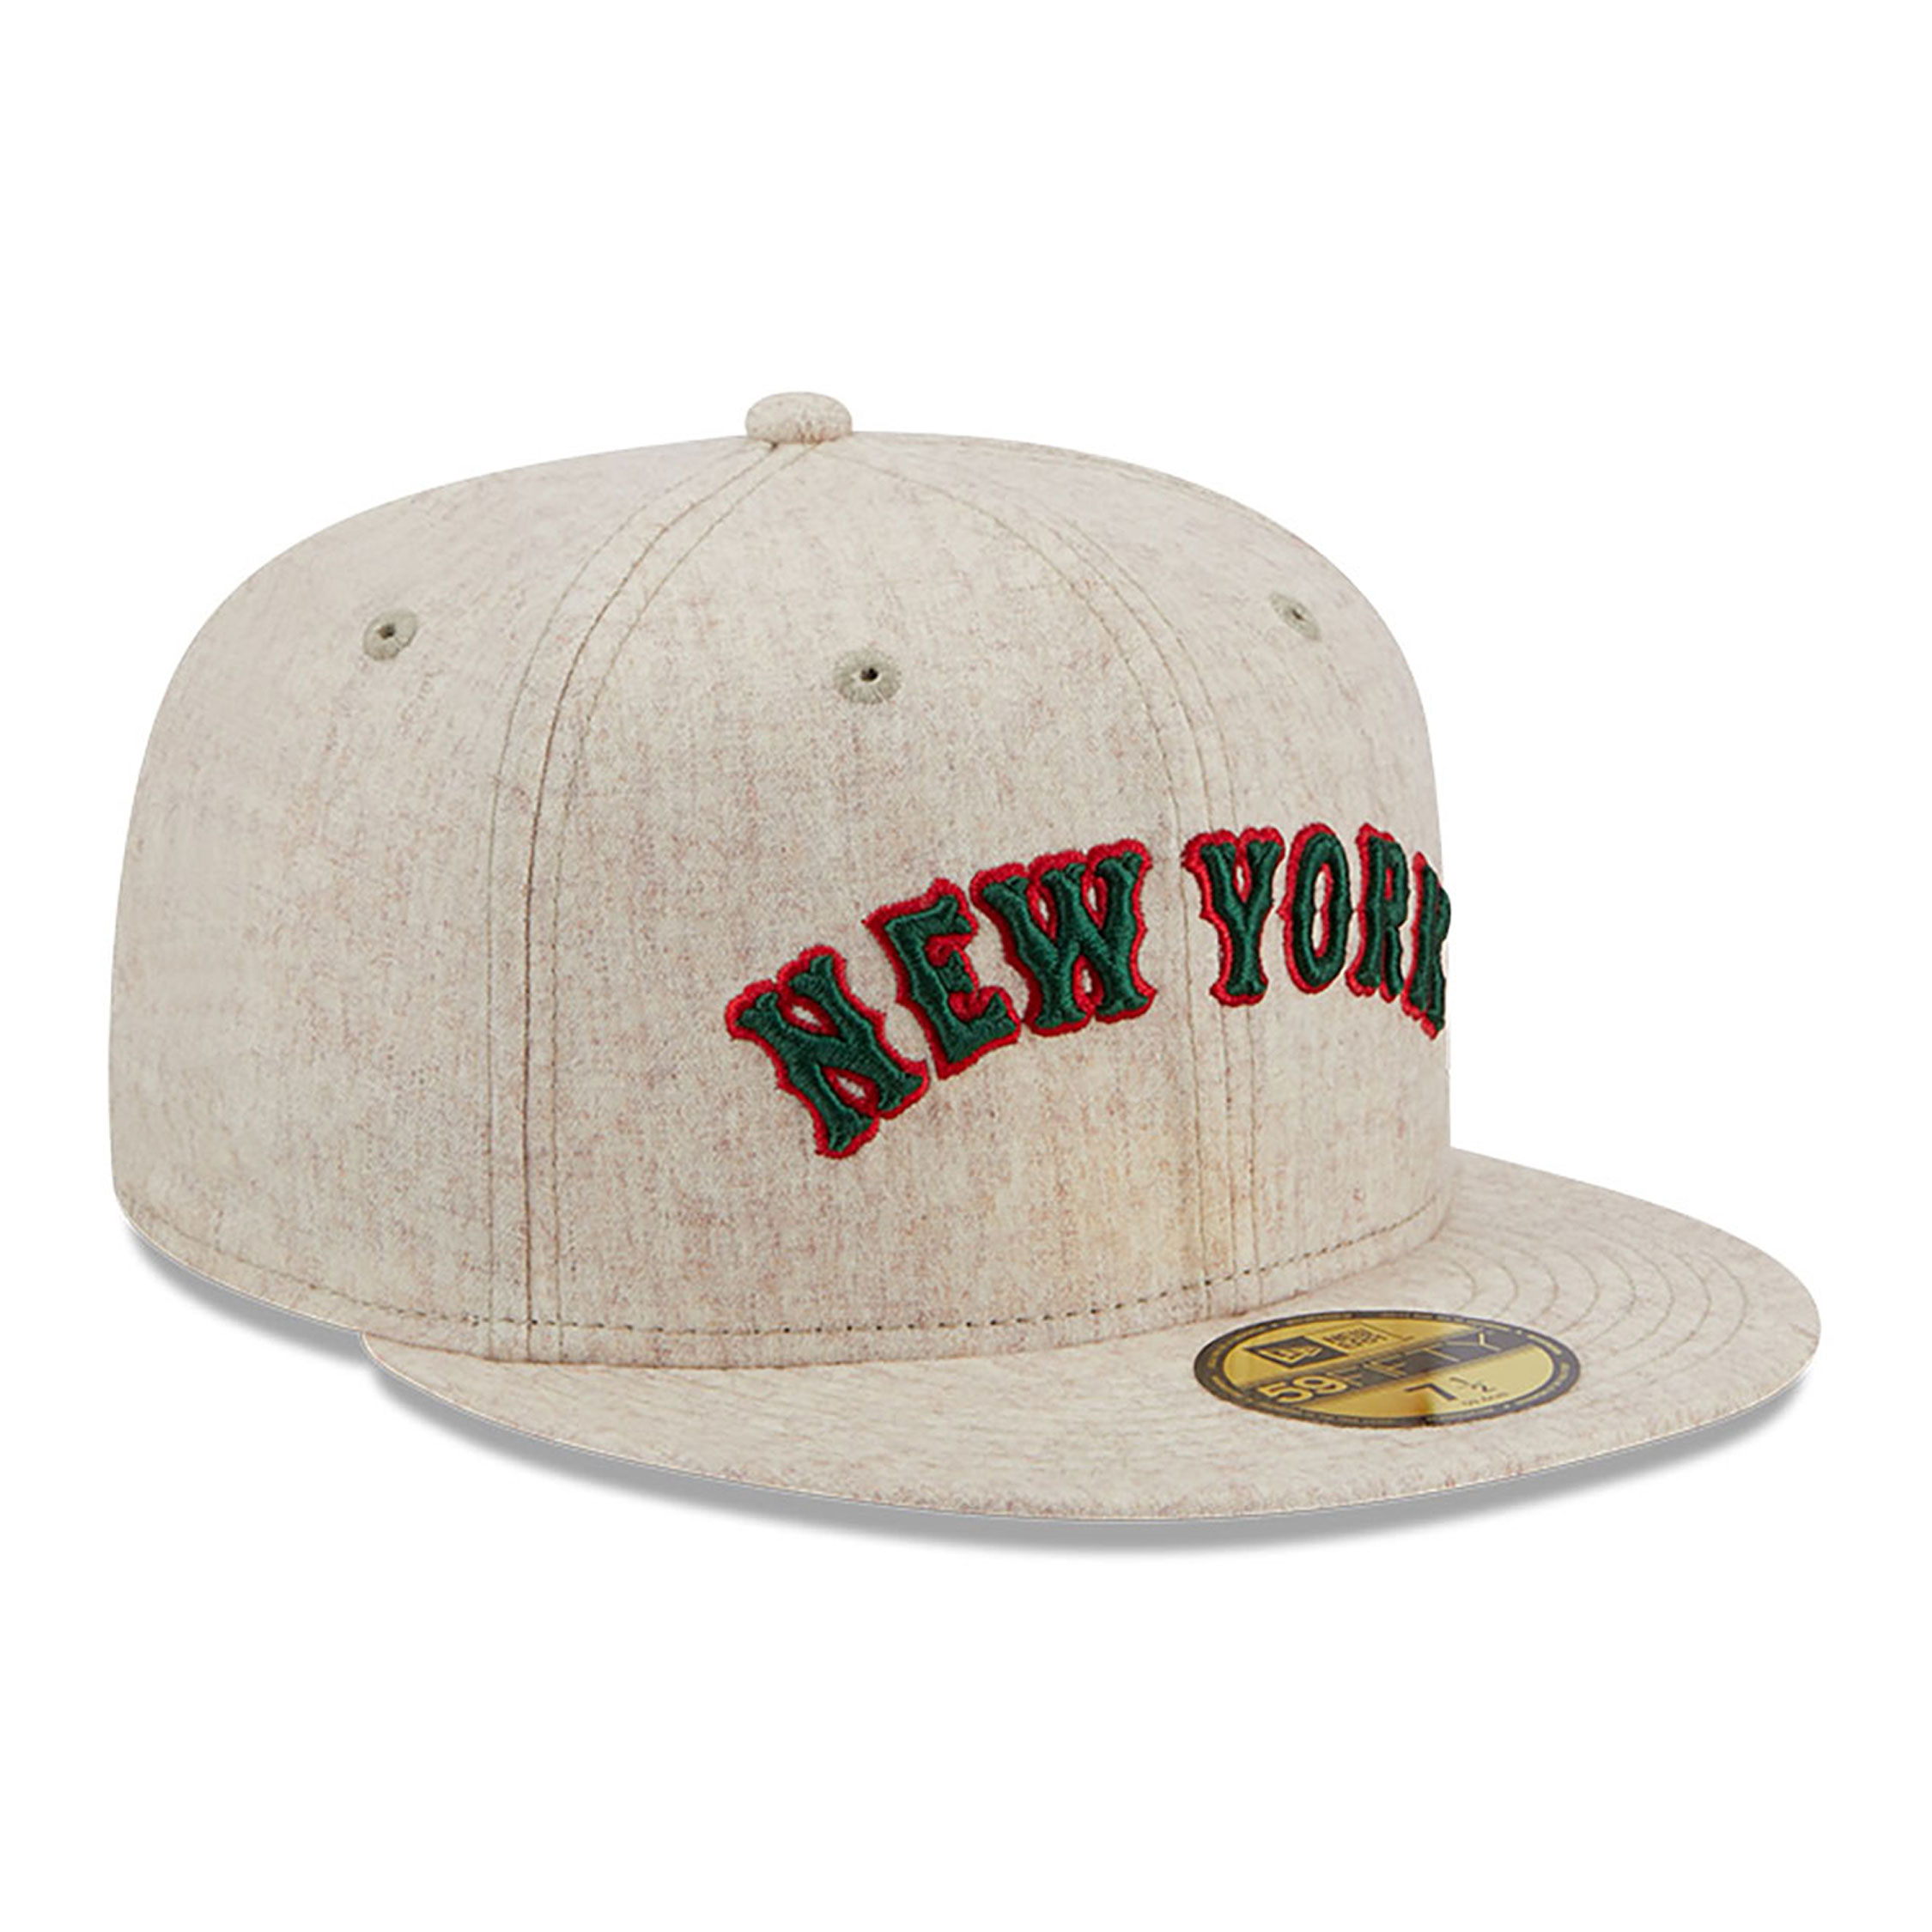 New York Mets Wool Plaid Light Beige 59FIFTY Fitted Cap